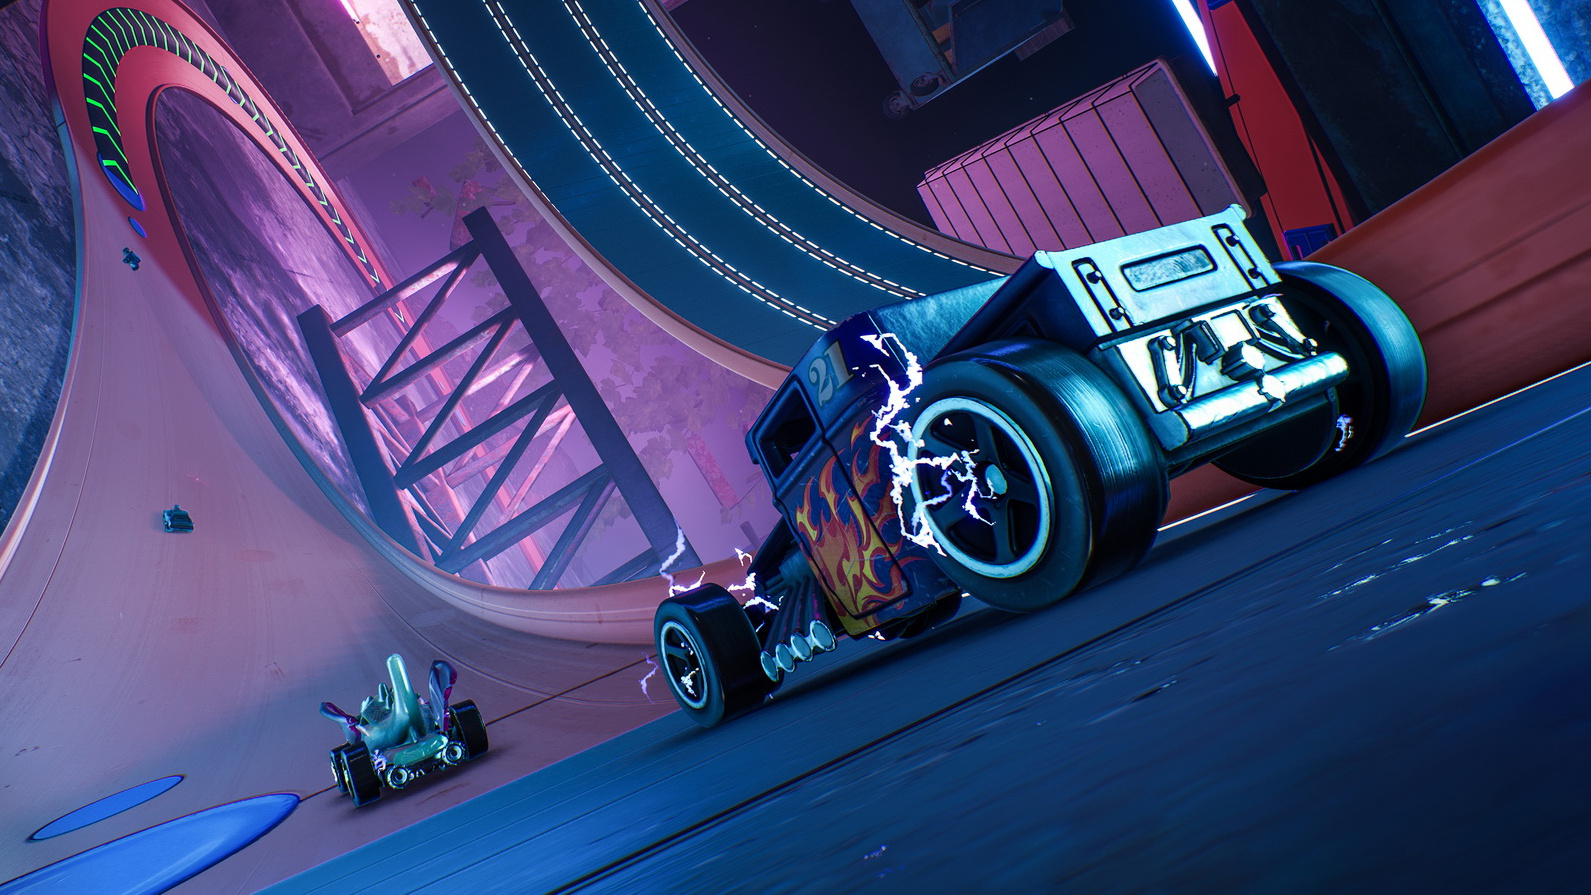 download hot wheels unleashed xbox for free